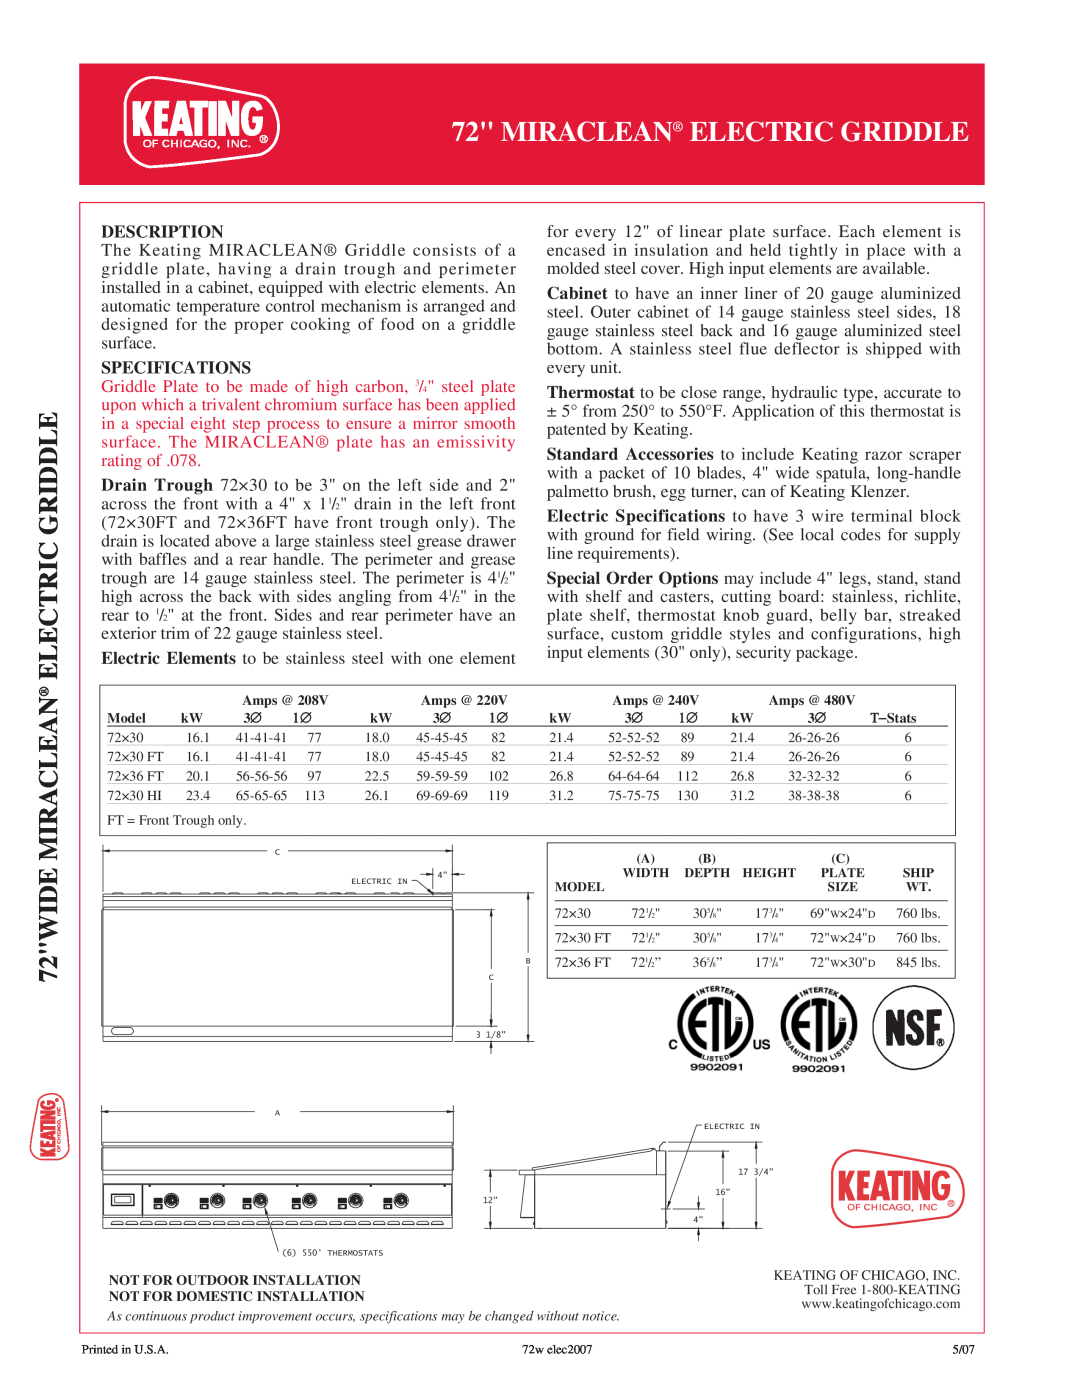 Keating Of Chicago 7236, 7230 manual 72WIDE, Description, Specifications, Miraclean Electric Griddle 